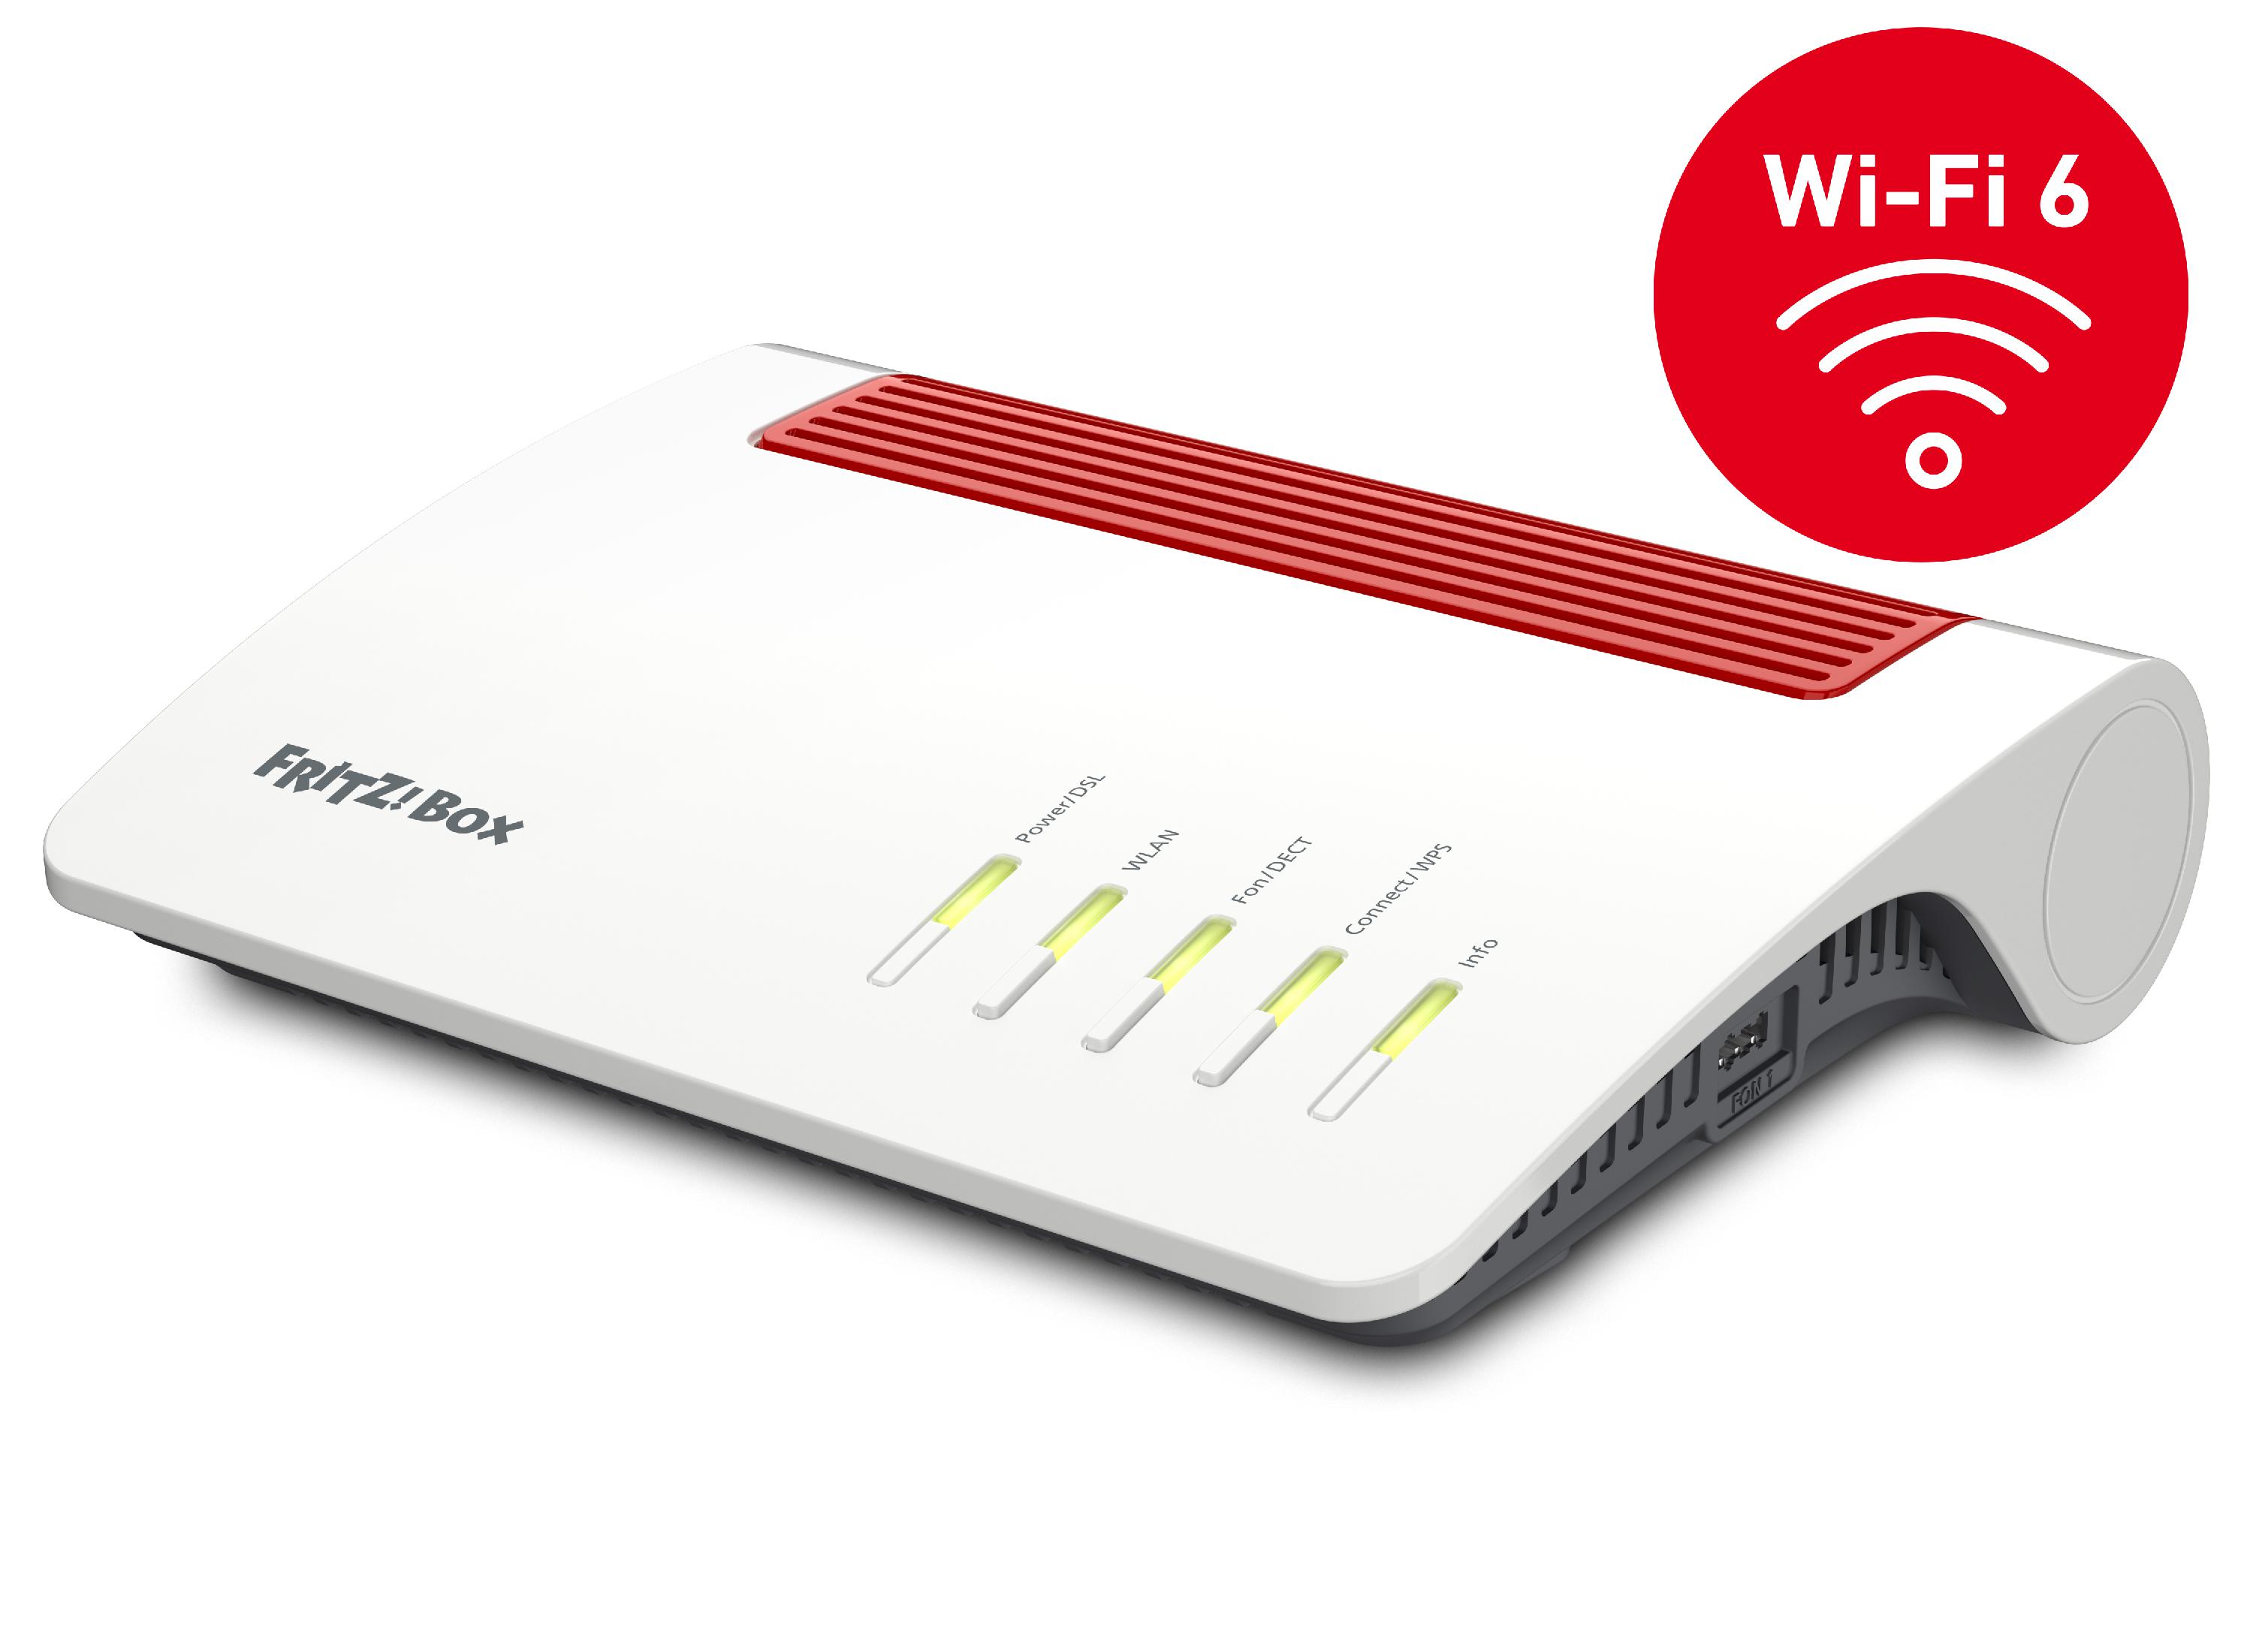 AVM FRITZ!BOX 7590 AX, wi-fi 6 modem-router voor alle ADSL / VDSL, Dualband Wi-Fi 6 (Wi-Fi AX) max 3600 Mbit/s, Mesh Master, DECT basis